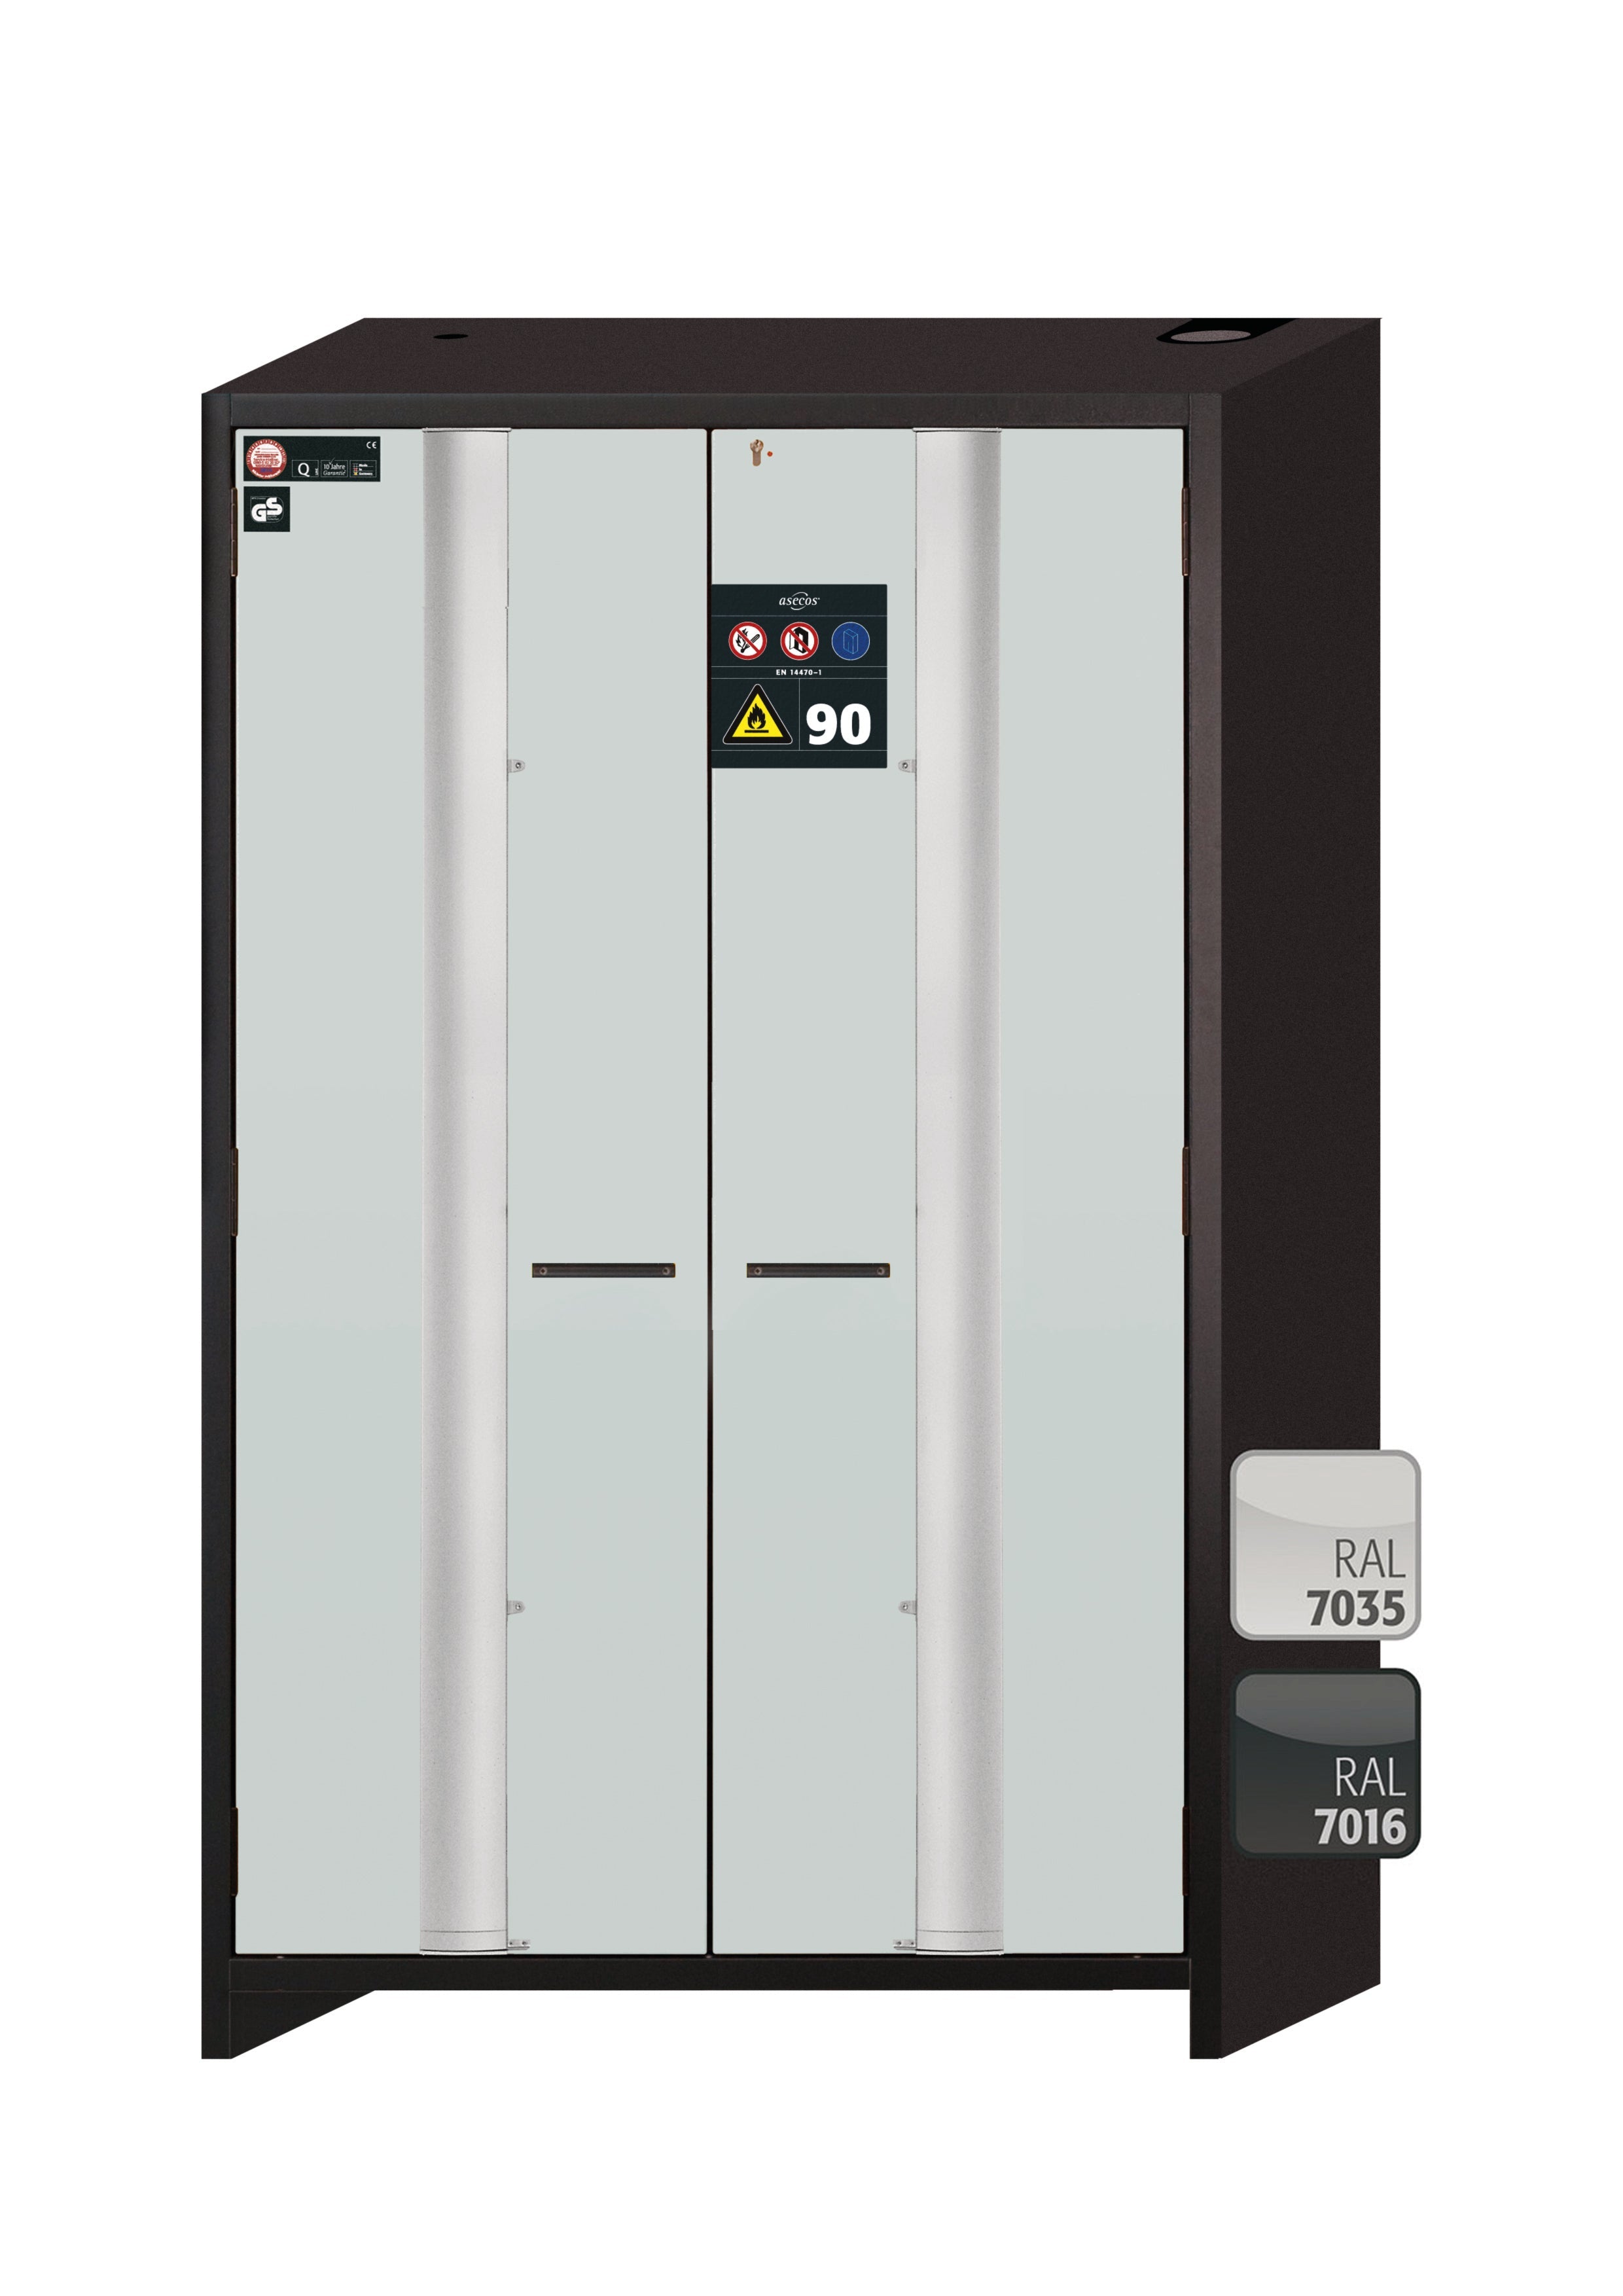 Type 90 safety cabinet Q-PHOENIX-90 model Q90.195.120.FD in light gray RAL 7035 with 6x standard pull-out tray (stainless steel 1.4301)